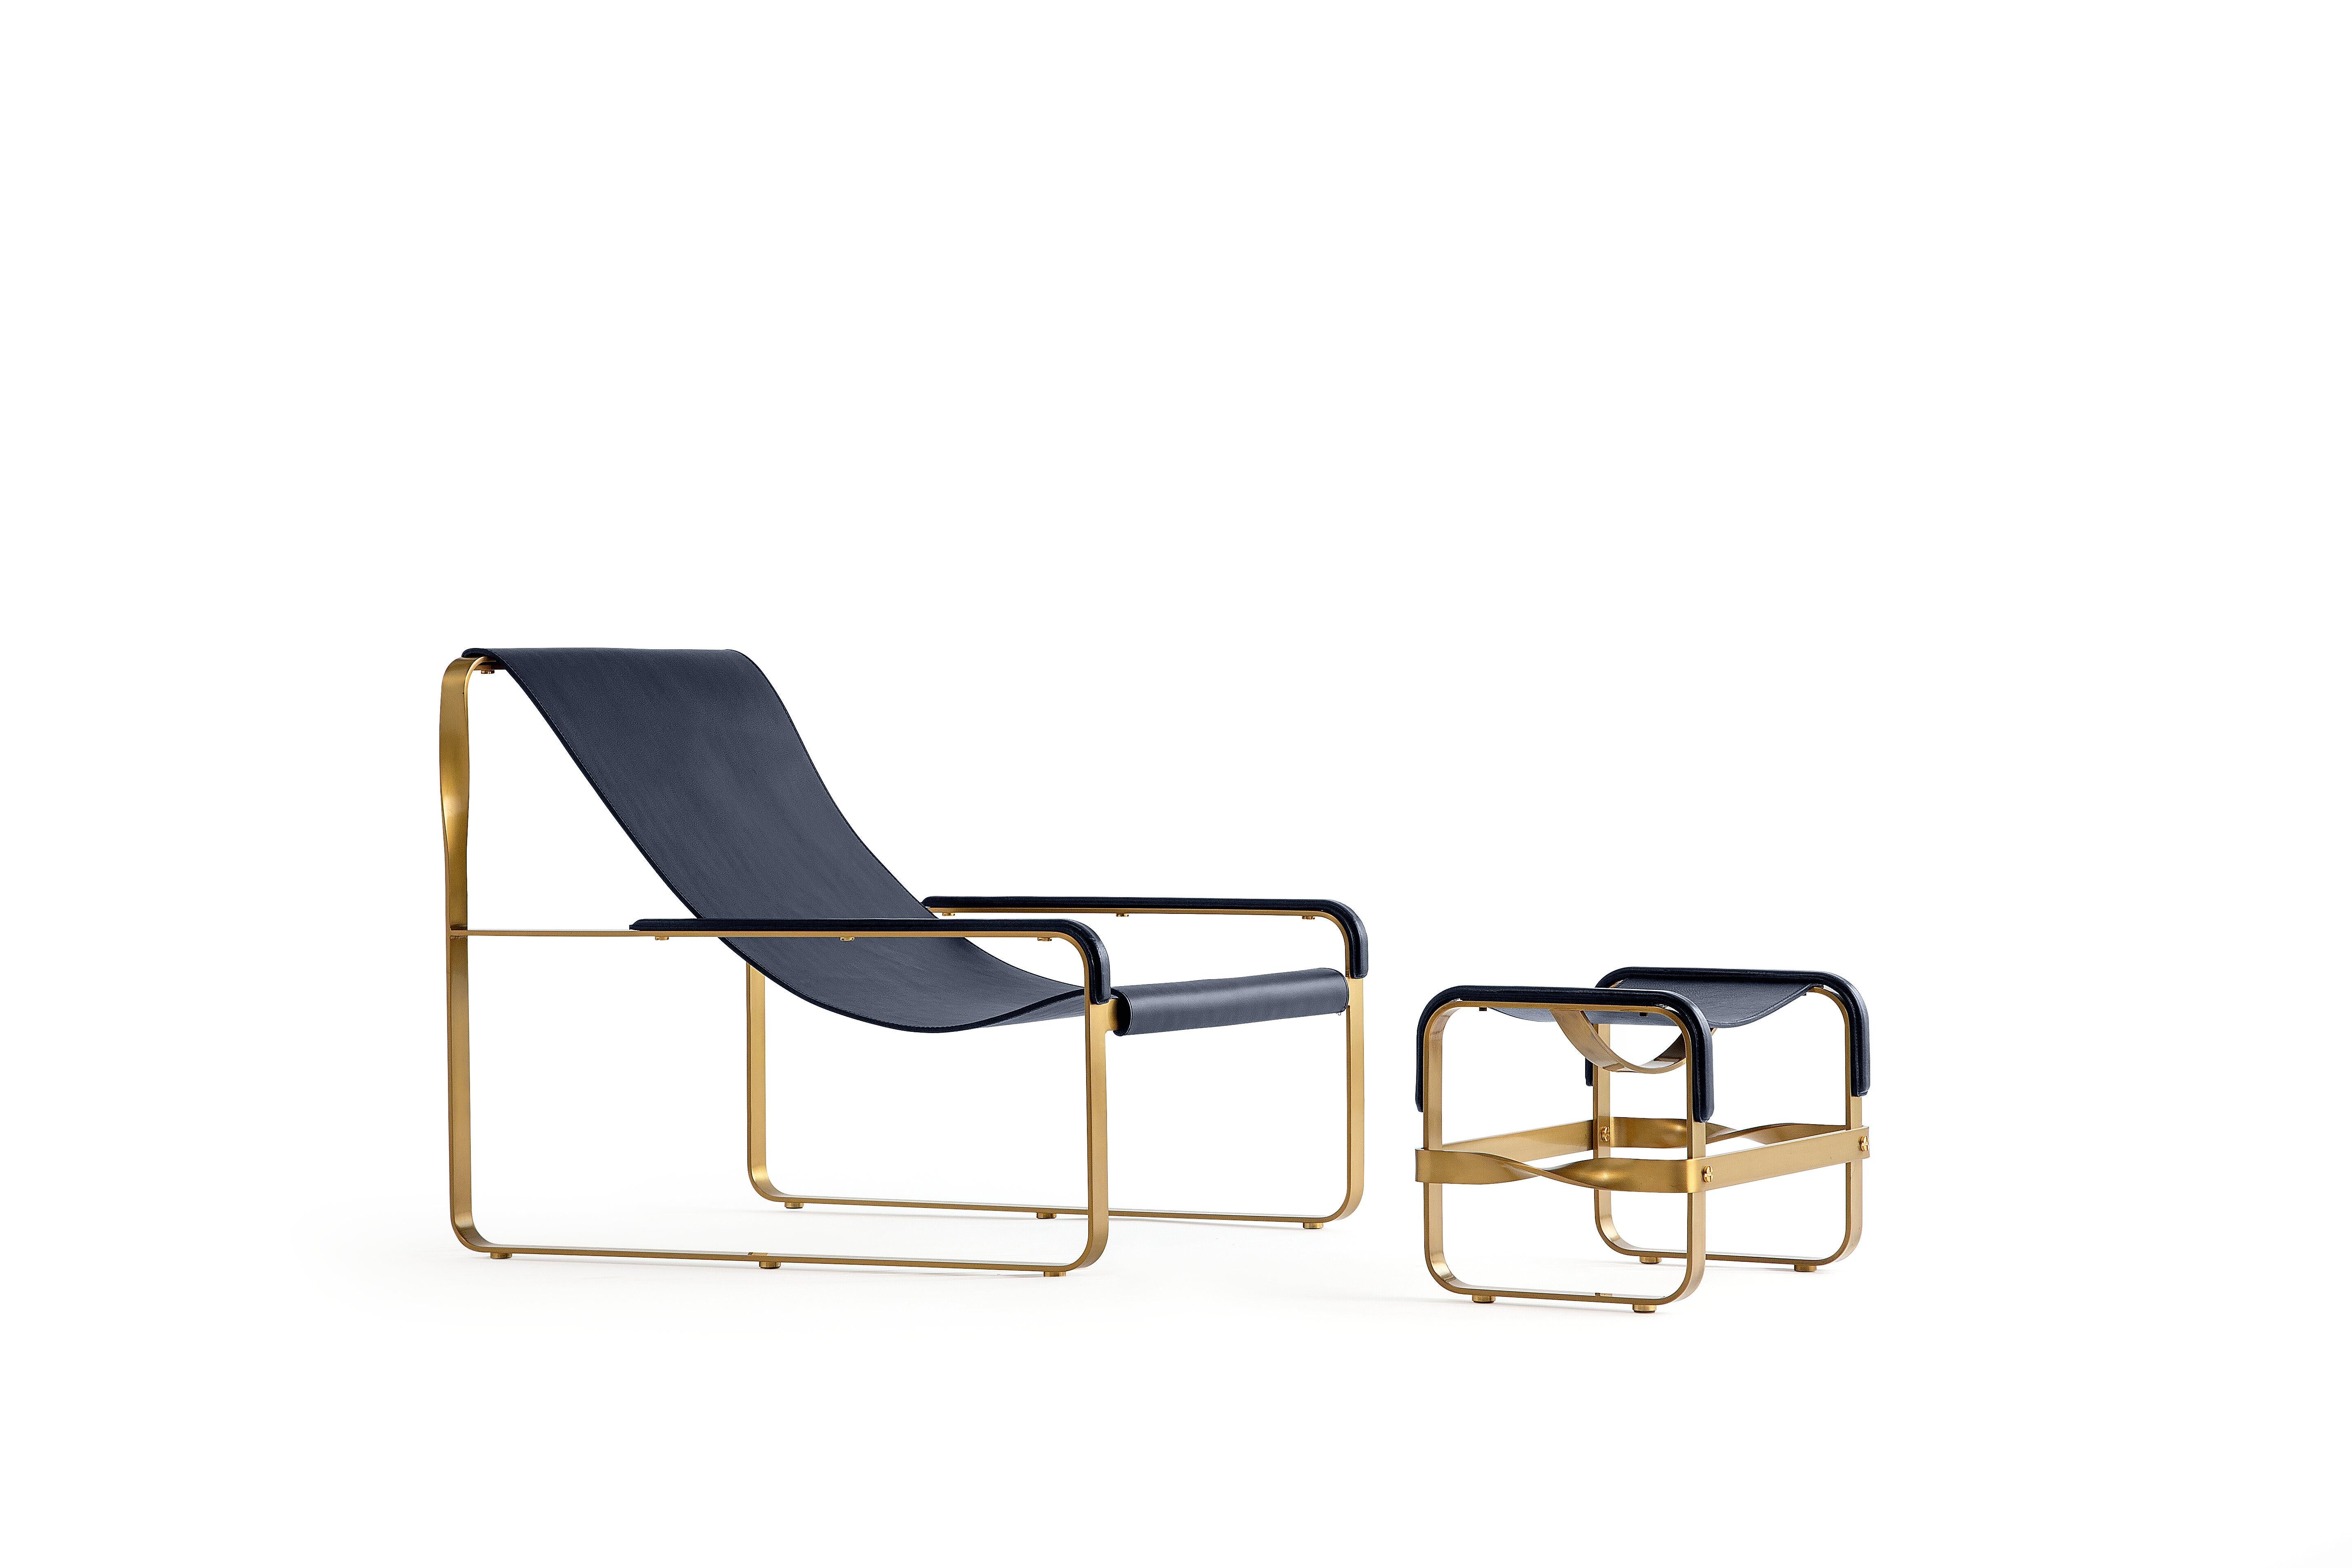 Classic Contemporary Chaise Lounge Aged Brass Steel & Navy Blue Leather In New Condition For Sale In Alcoy, Alicante